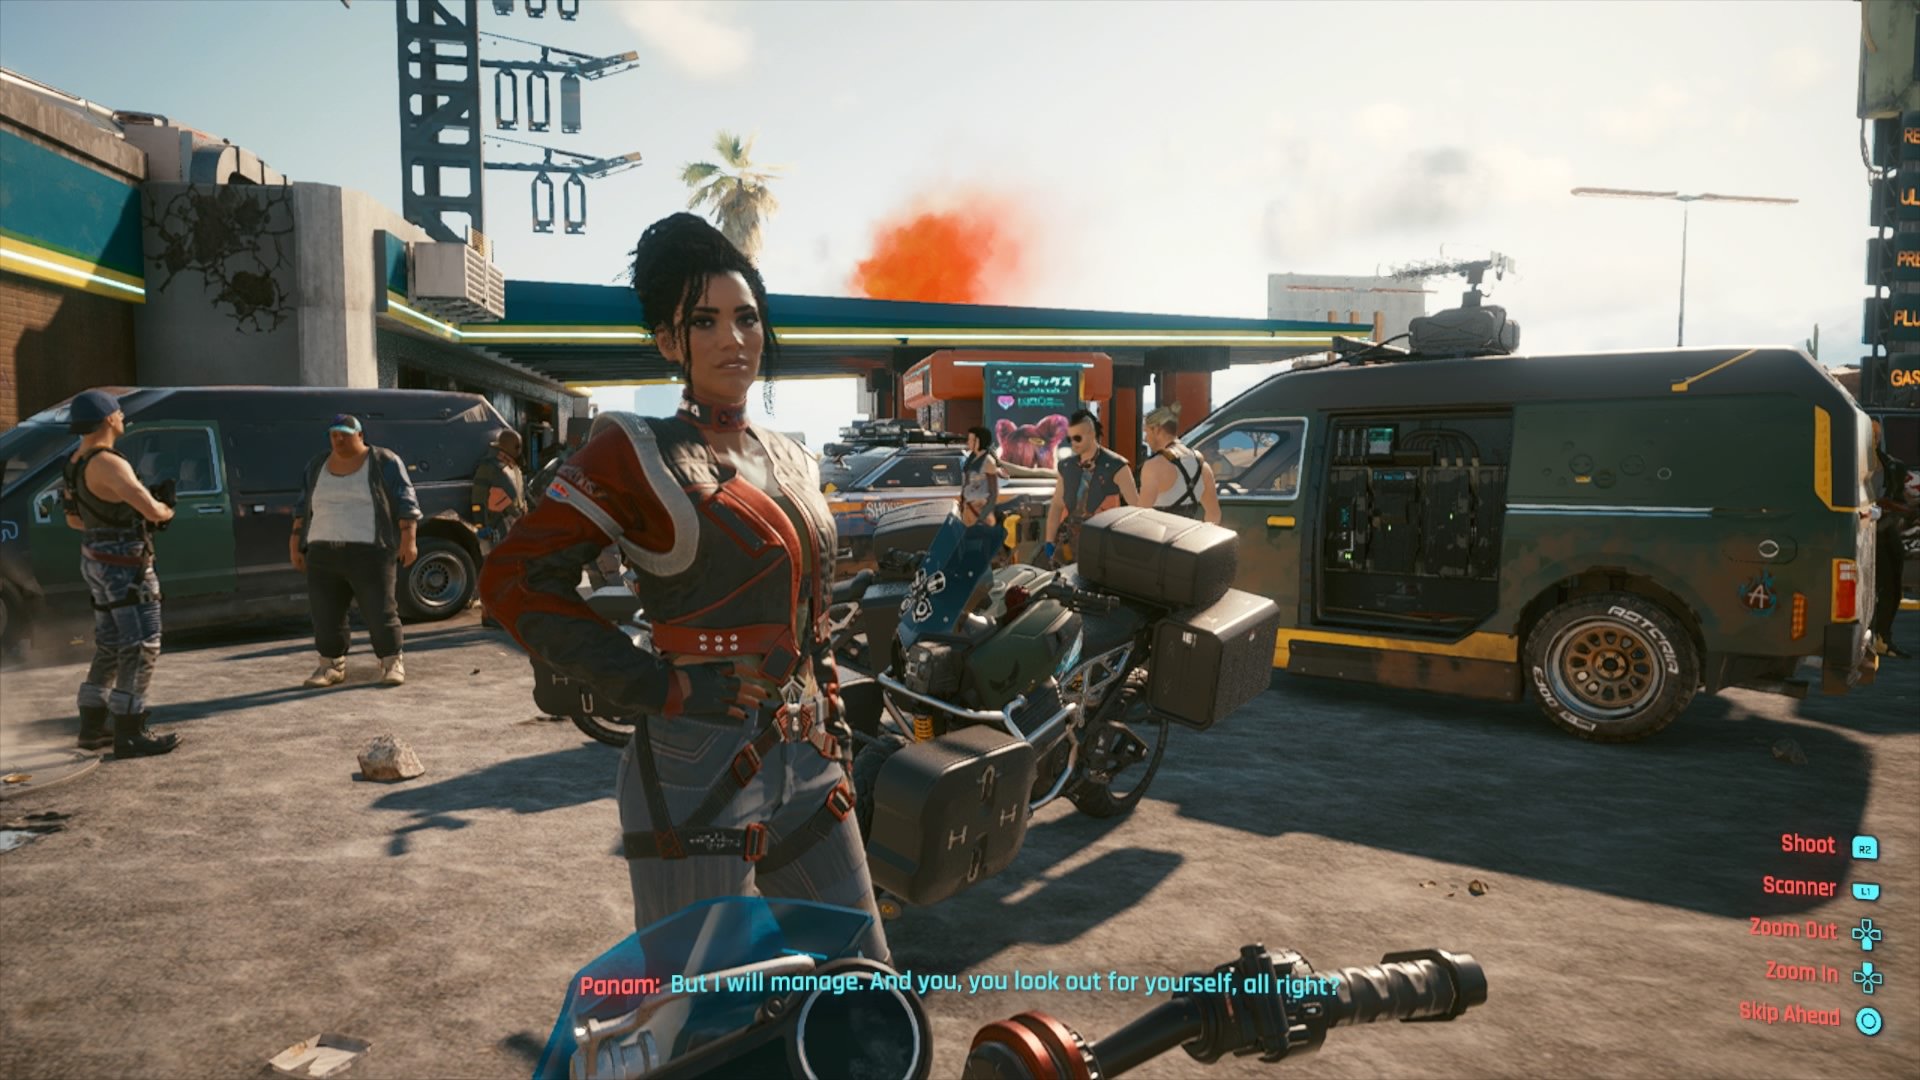 Cyberpunk 2077 review: CDPR's vision is heavily on old consoles